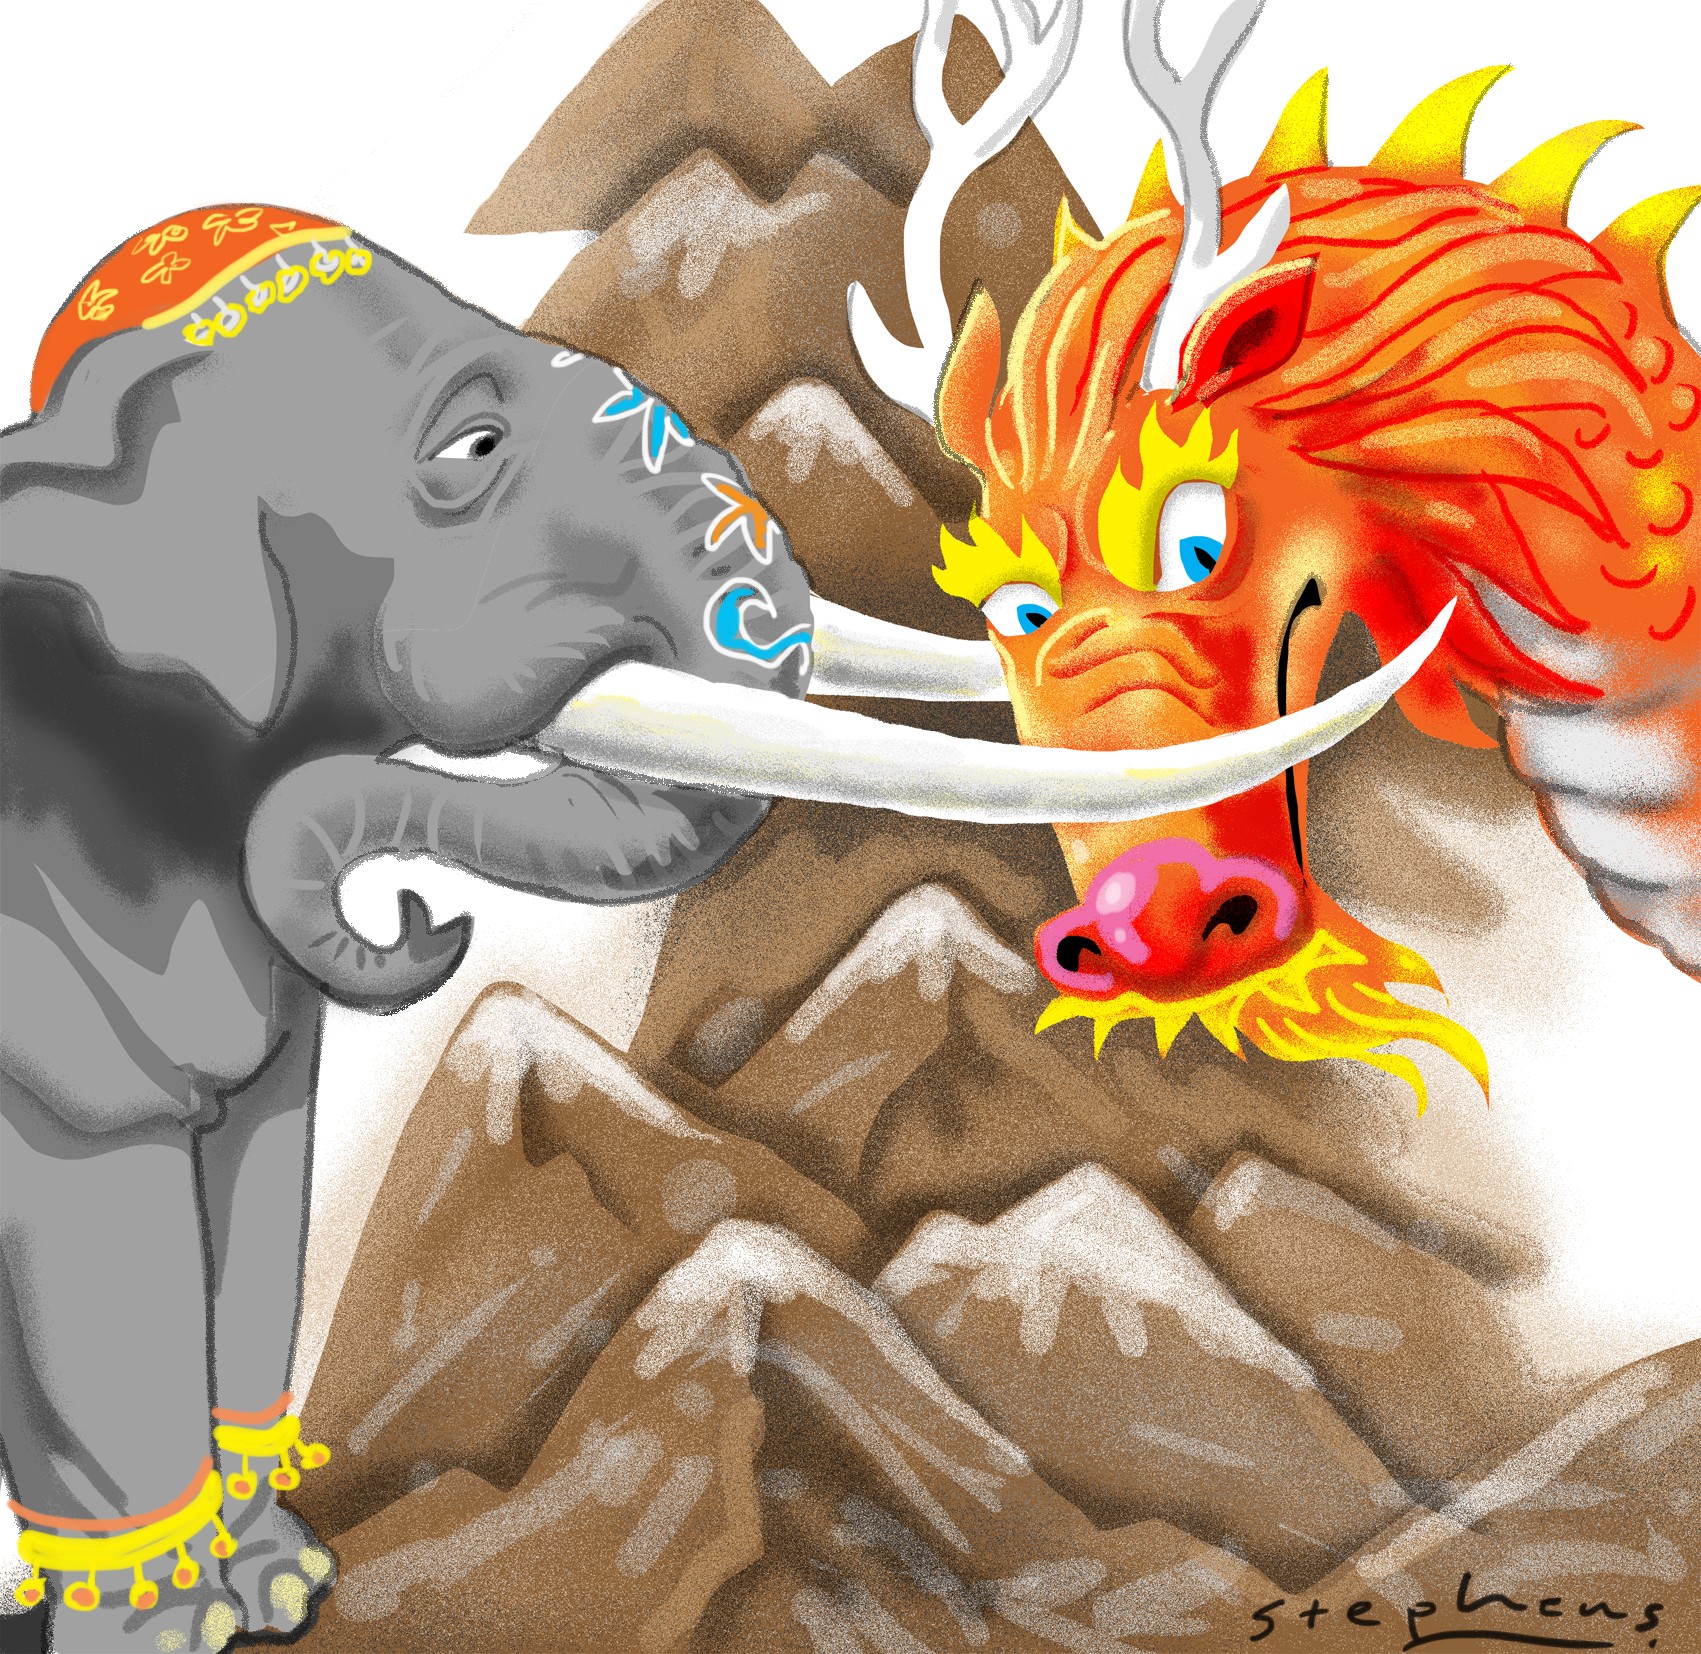 Despite the competition ­between the Chinese “dragon” and the Indian “elephant”, the two economies are considered somewhat complementary and have great potential for pragmatic and mutually beneficial cooperation. Illustration: Craig Stephens